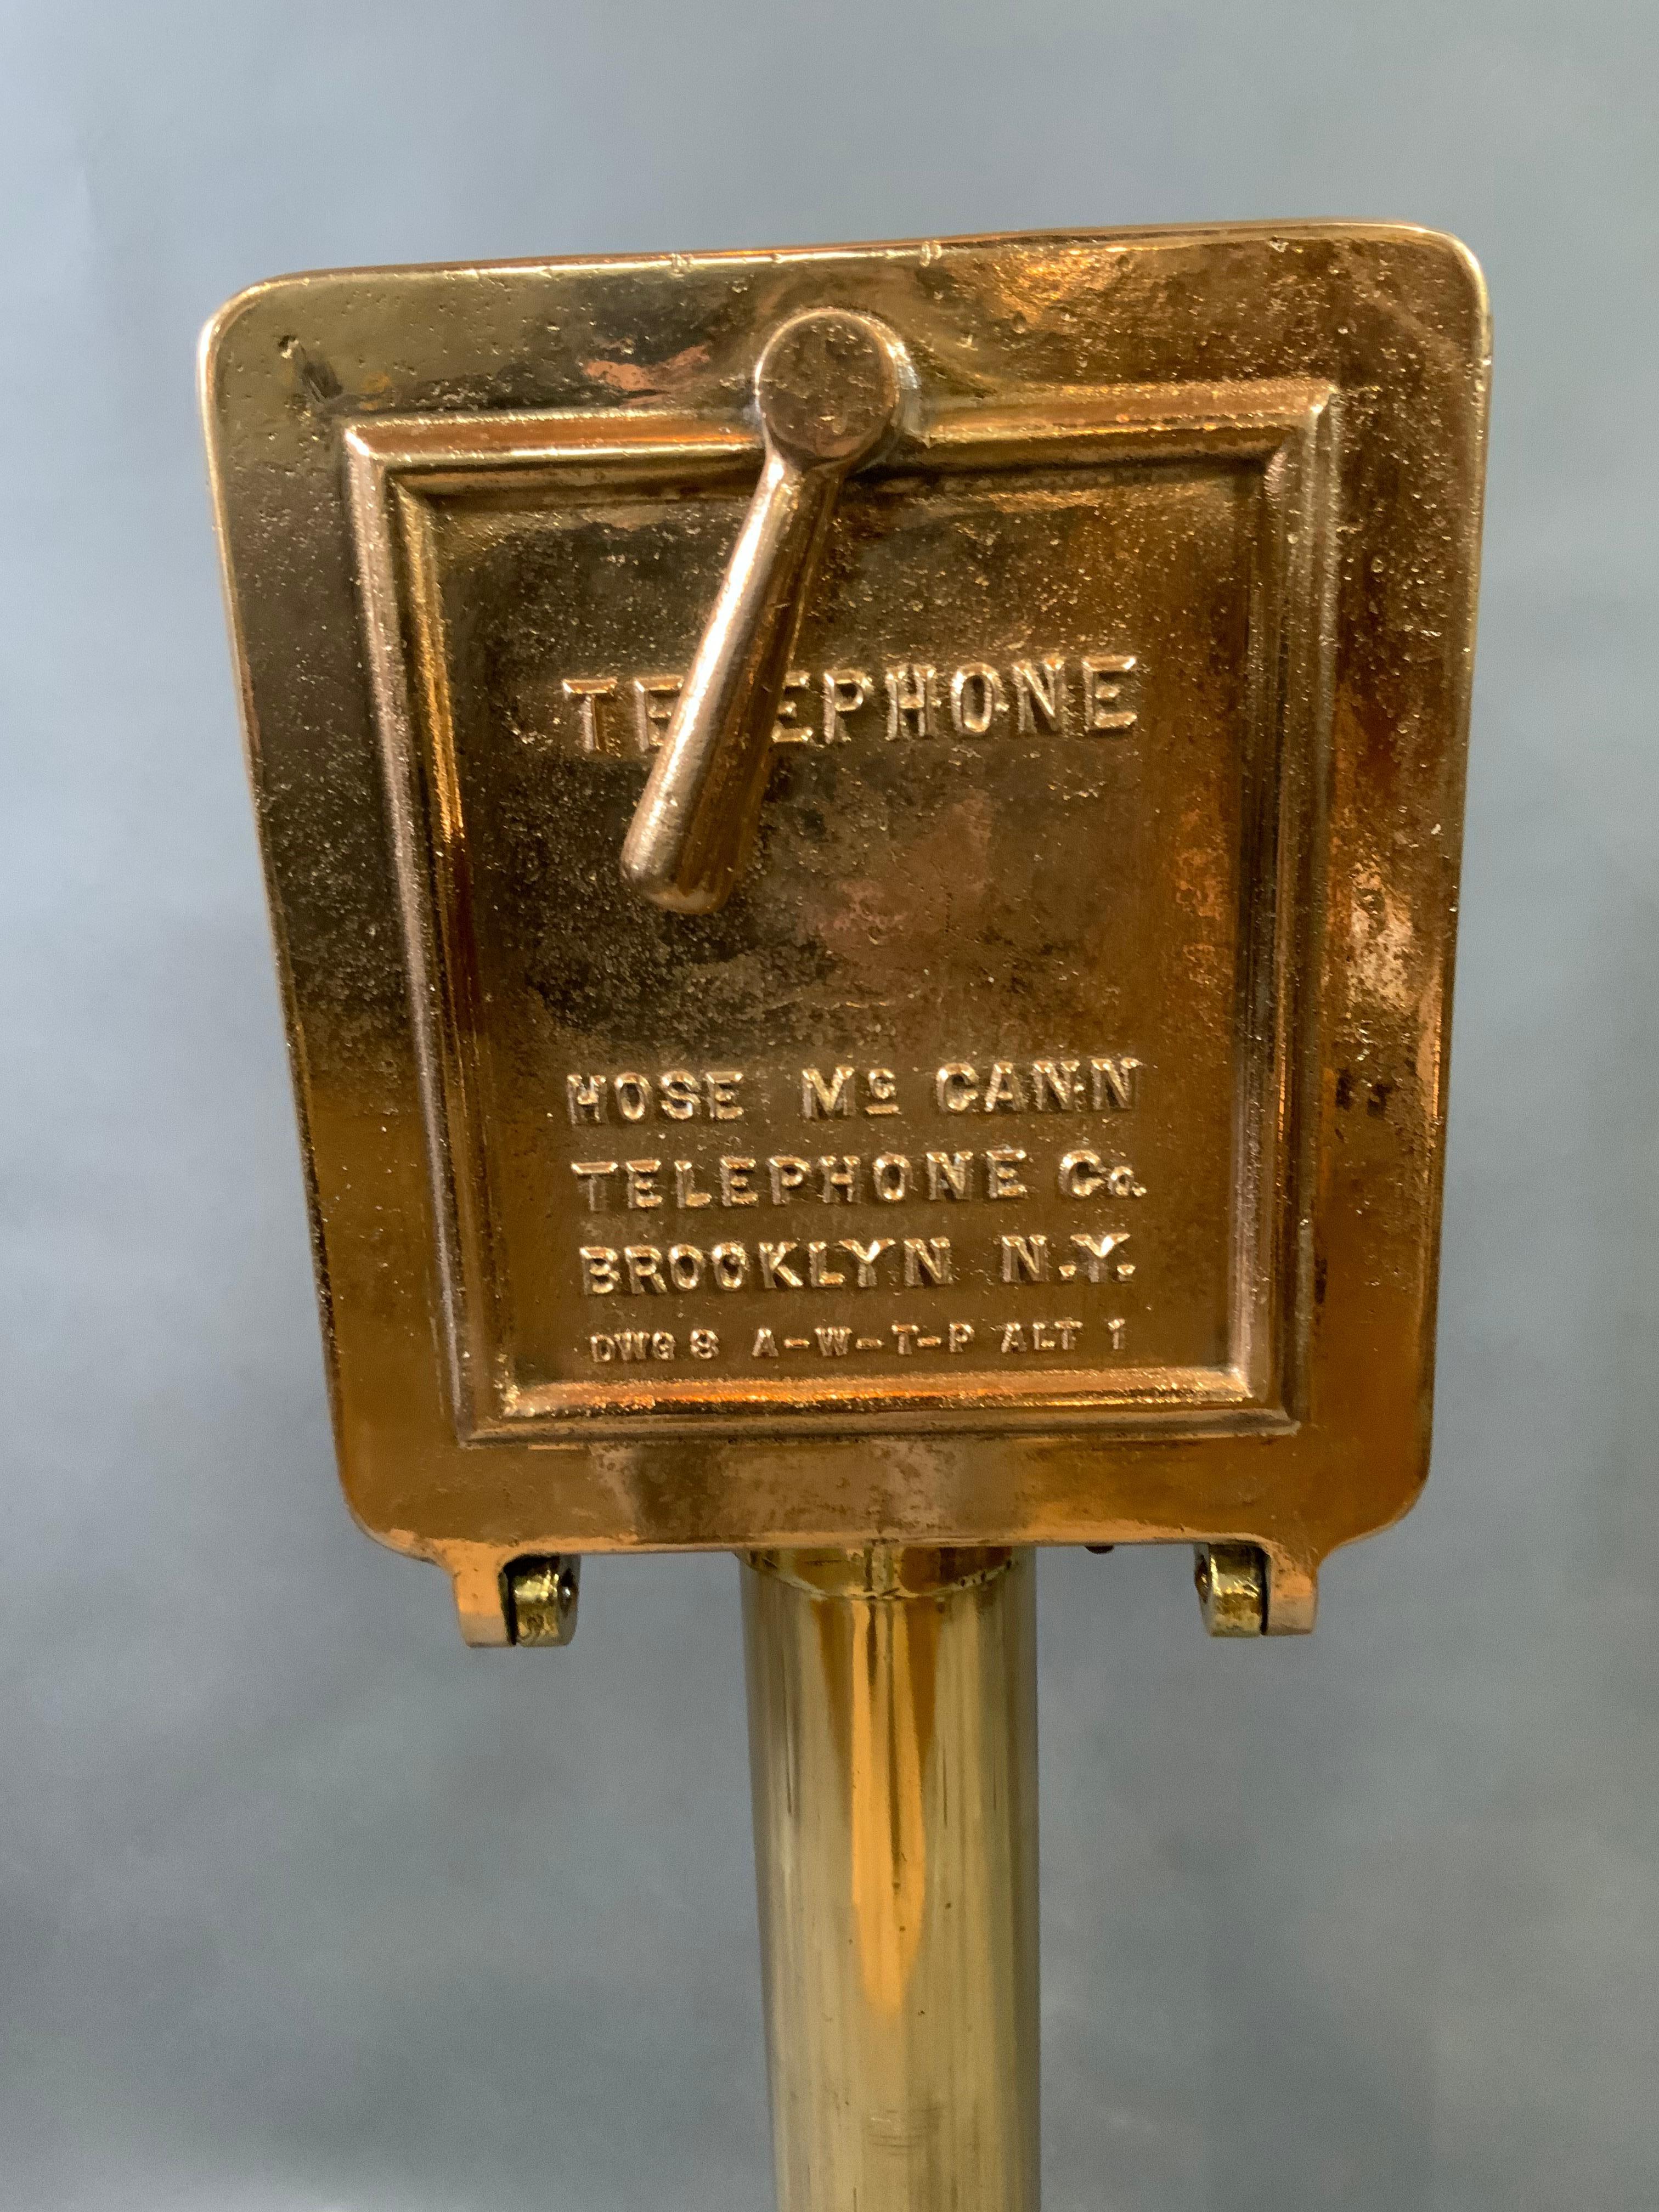 Solid brass ships telephone on pedestals. Phone is fitted inside an incredibly strong solid brass box that is highly polished and lacquered. Weight is 88 pounds. Dimensions 46 tall by 12 wide by 8 deep. $3295.